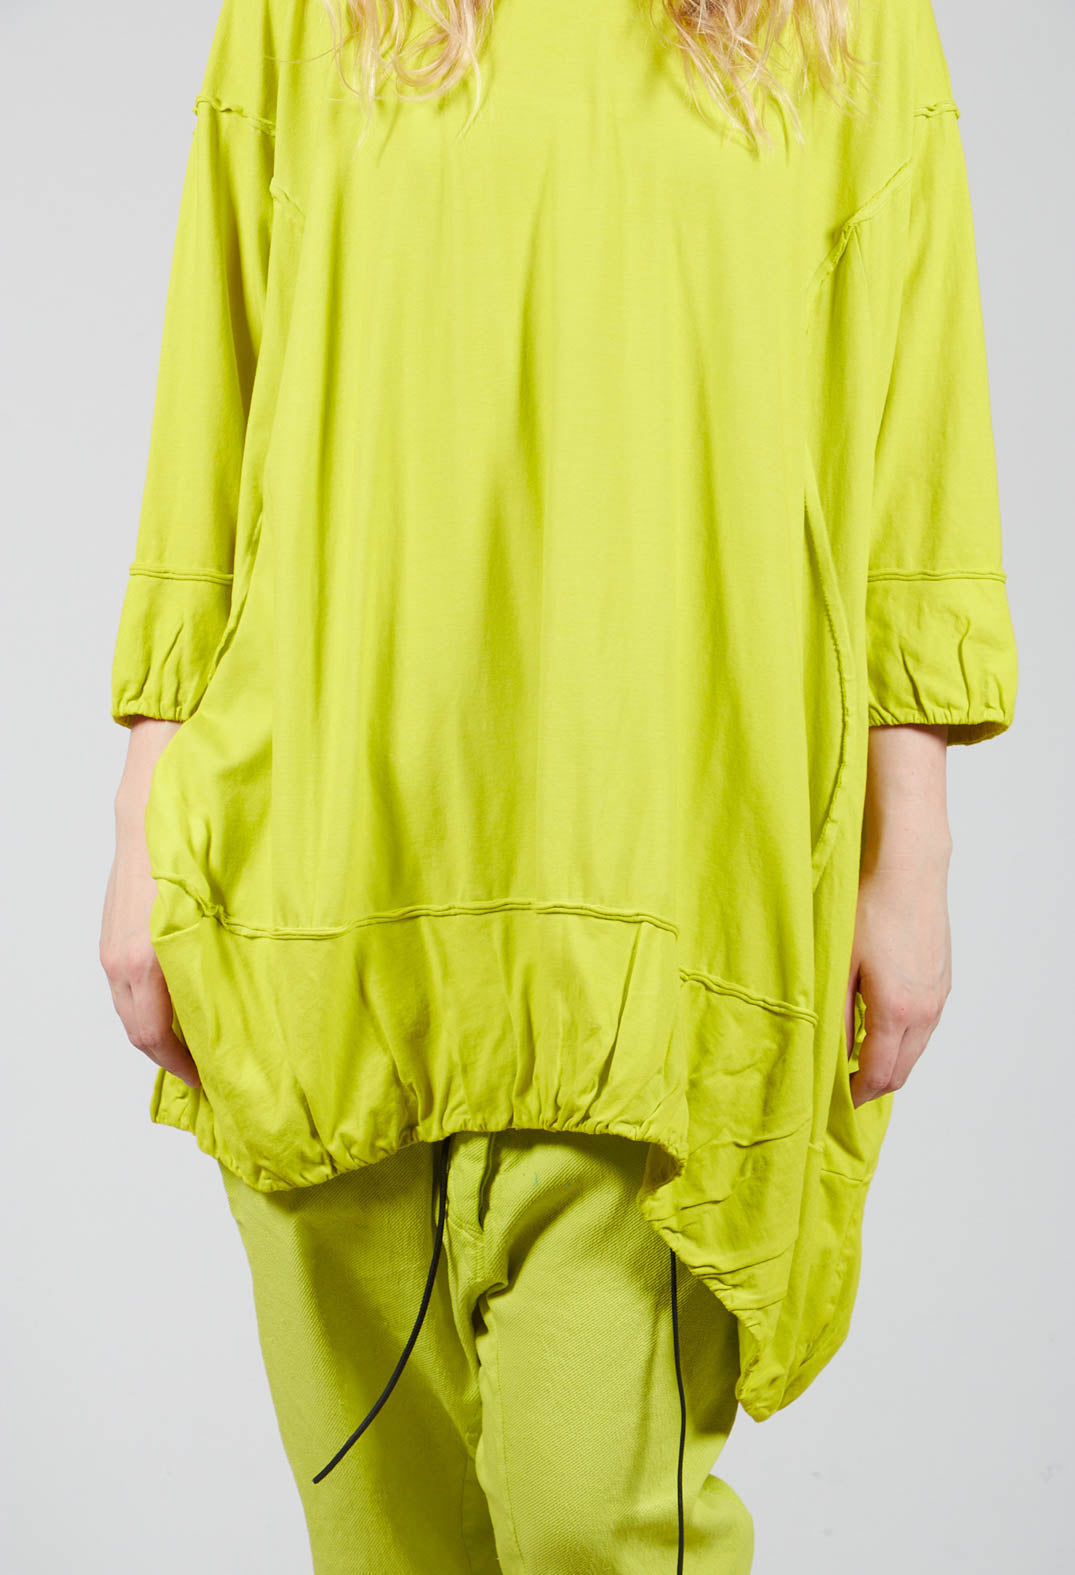 Mid Length Jersey Tunic with Ruffle Hem in Spring